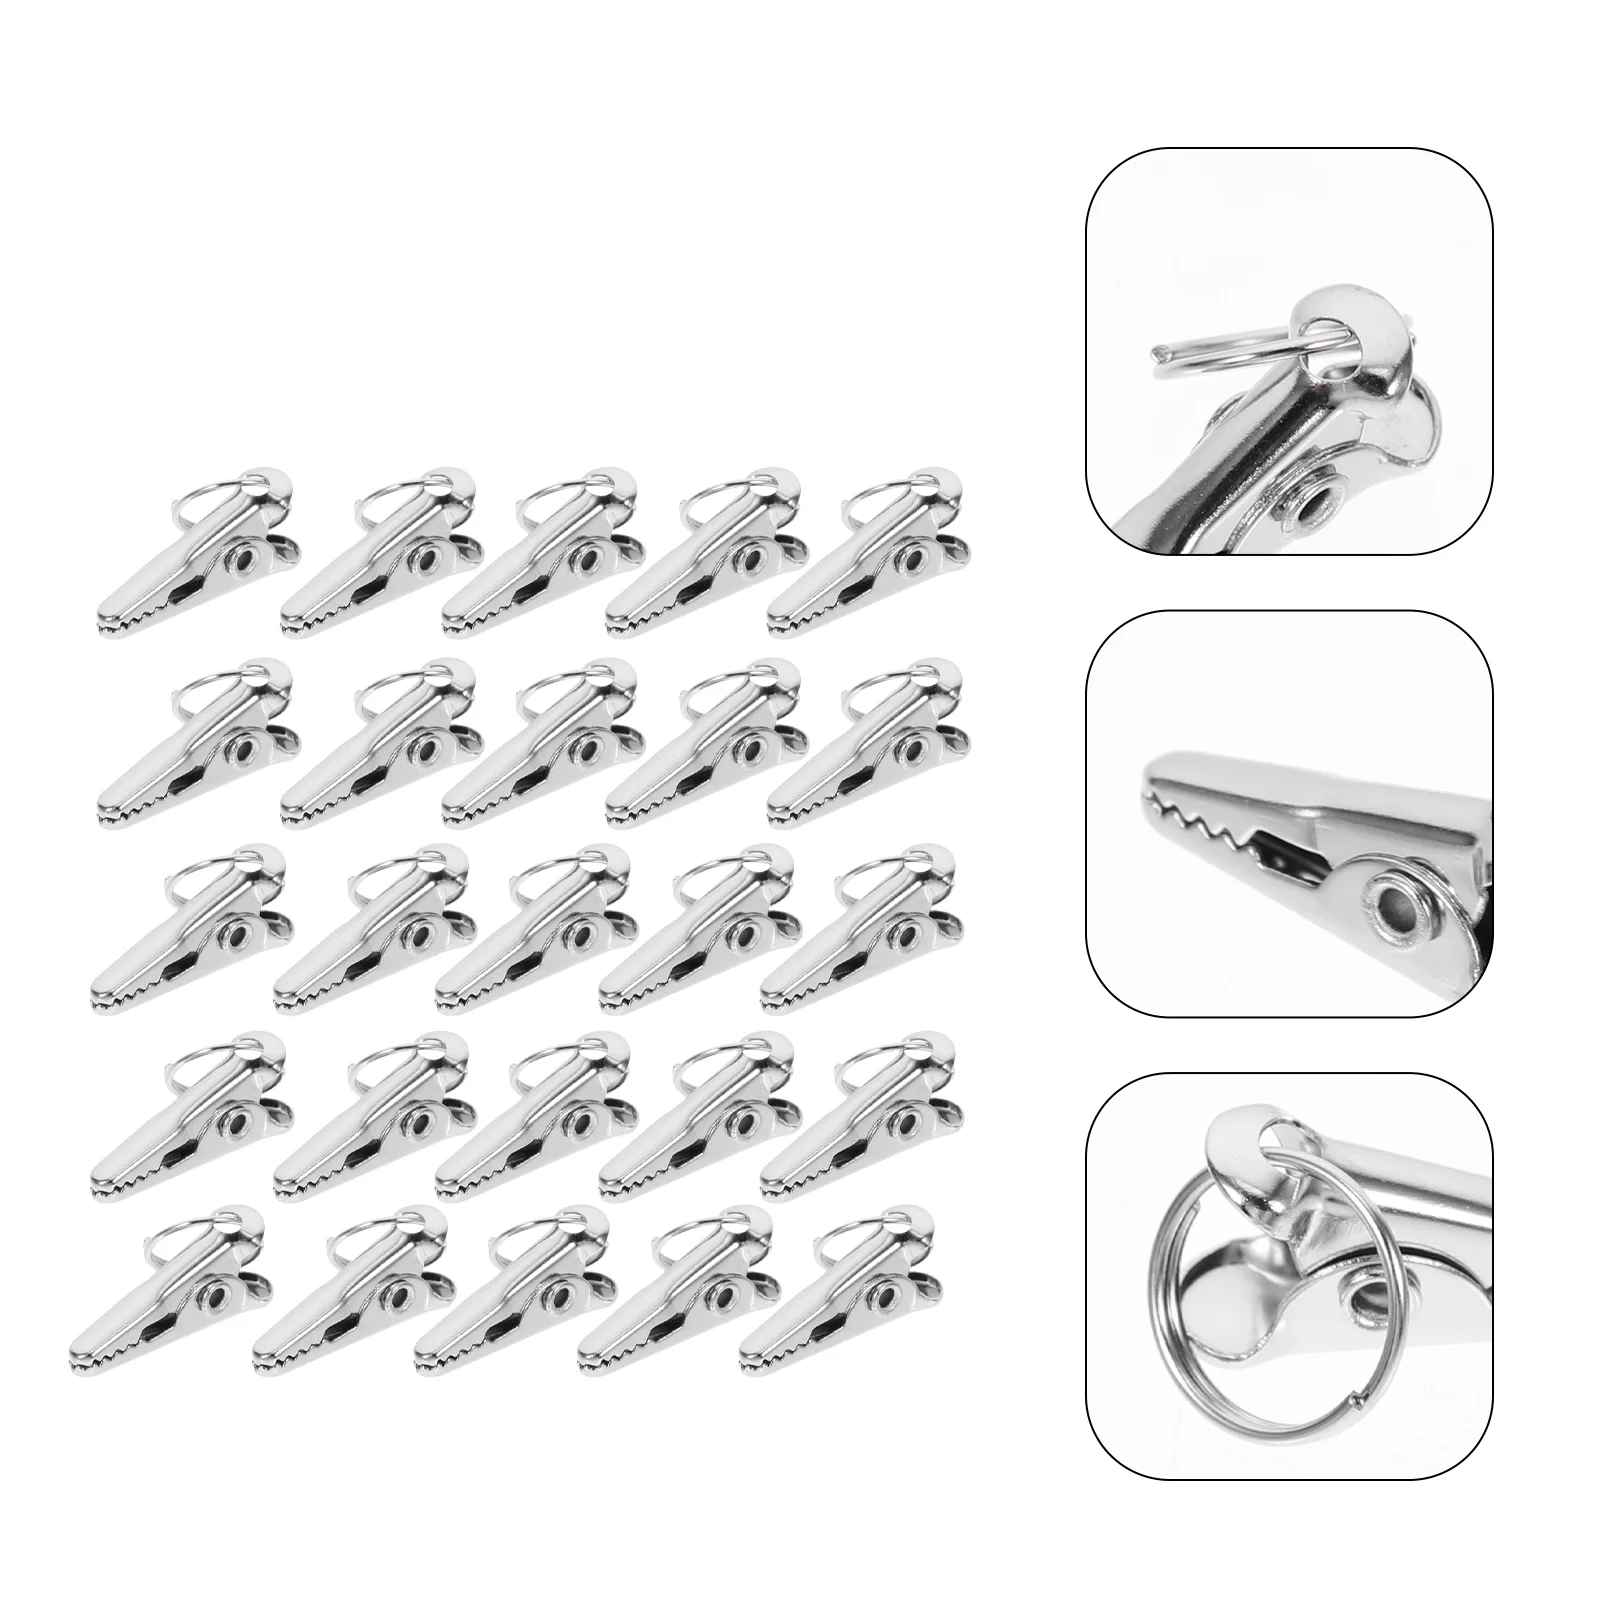 

Clips Alligator Ornament Hooks Metalshaped Crocodile Christmas Small Hangers Clamps Clip Test Hanger Hair Electrical Prong